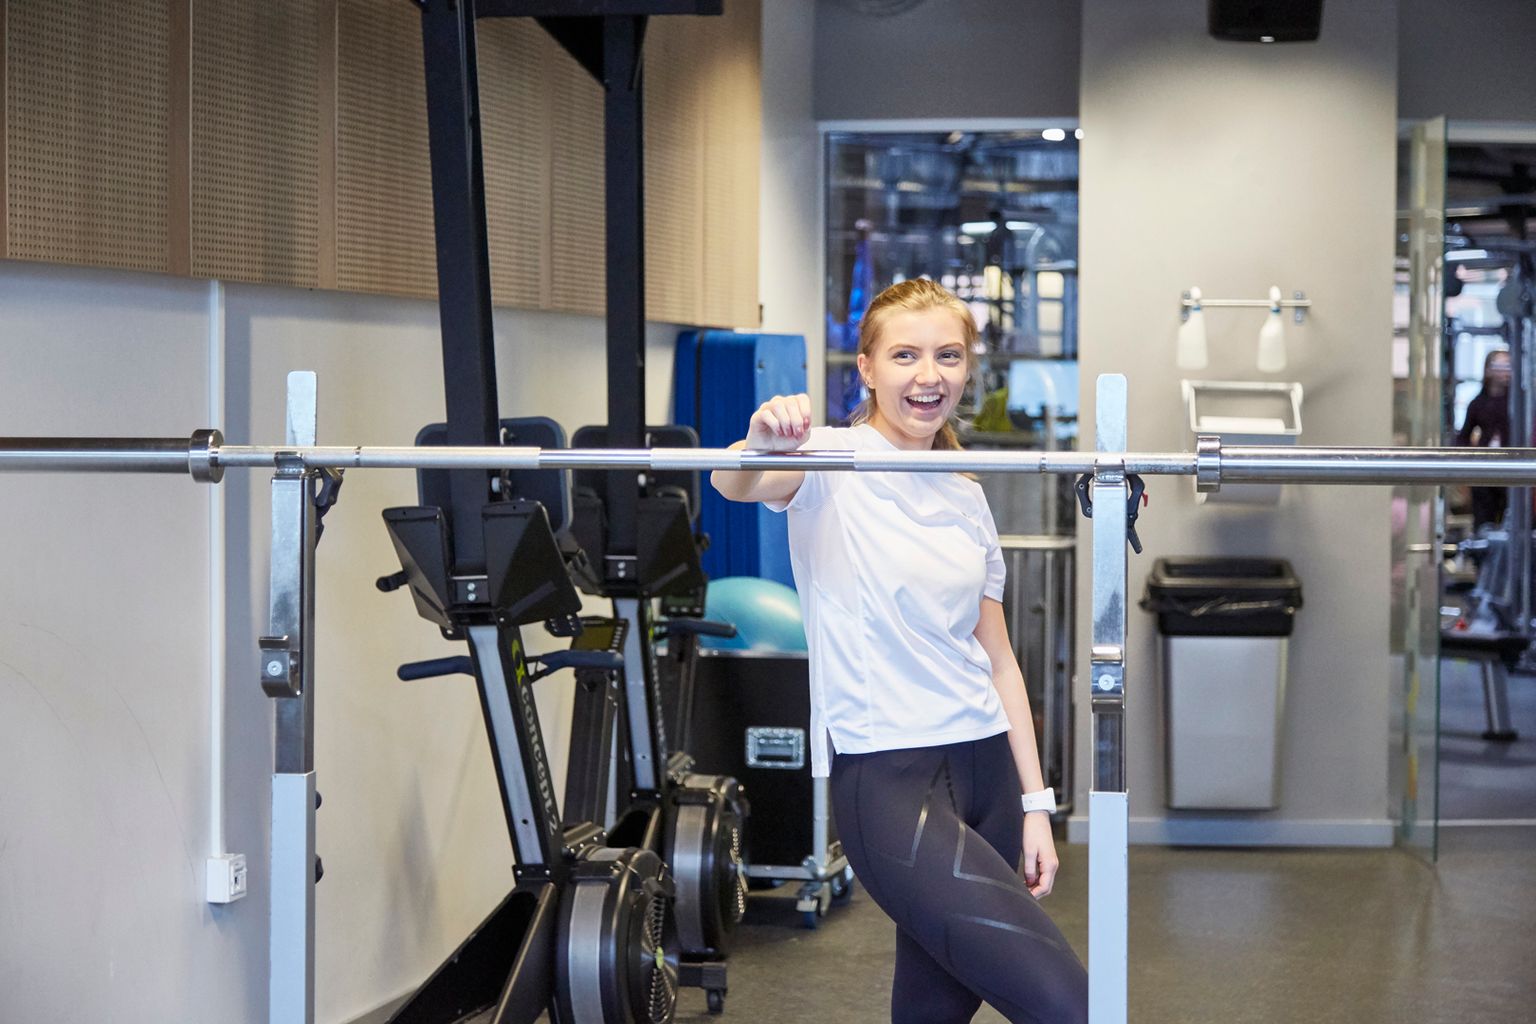  Smiling woman holds barbell during workout.